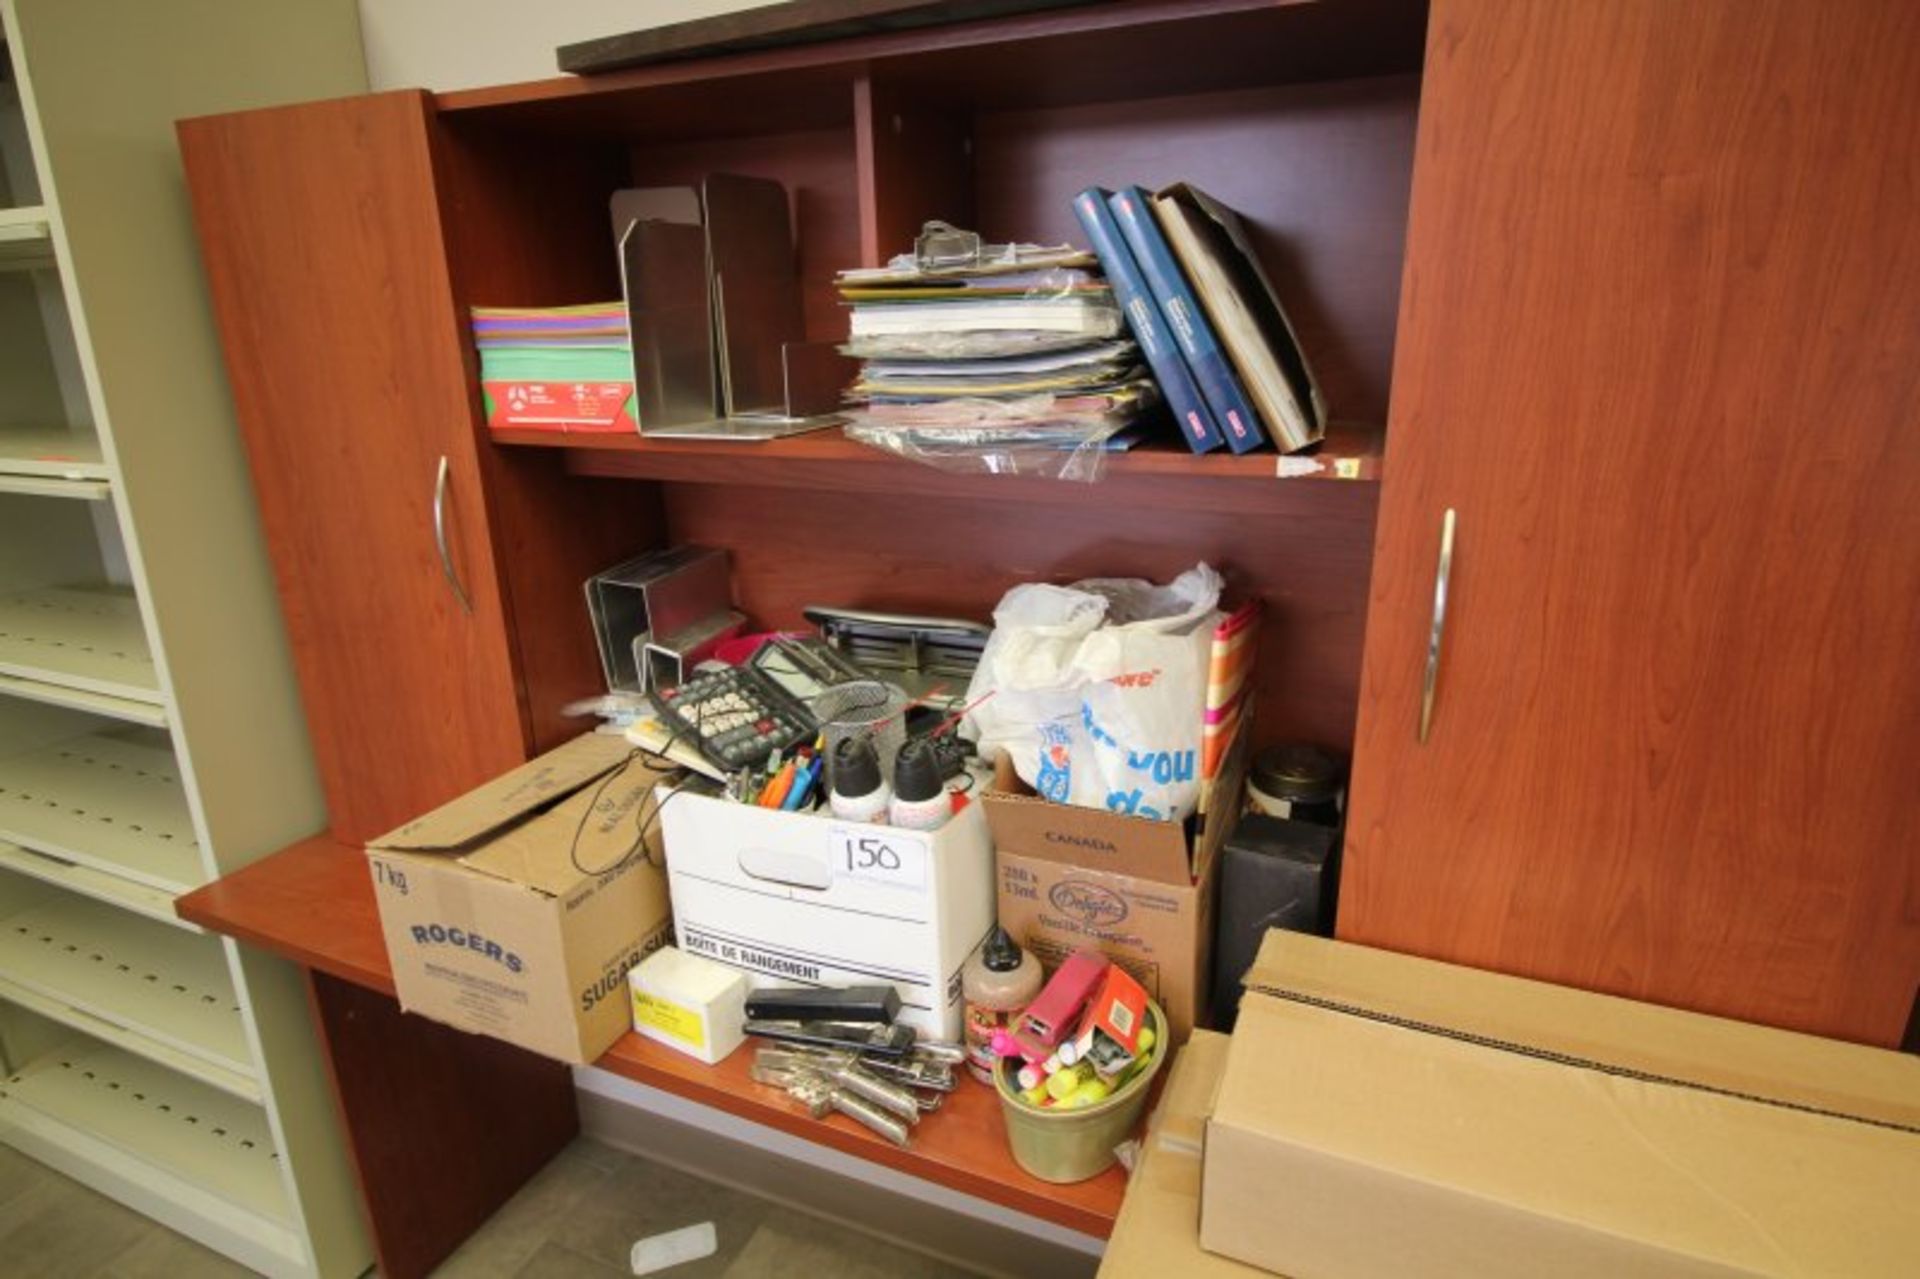 ALL SUPPLIES IN OFFICE, CASH AND STORAGE BOX, PICTURES, STATIONARY, ETC, NO ELECTRONICS INCLUDED - Image 3 of 5